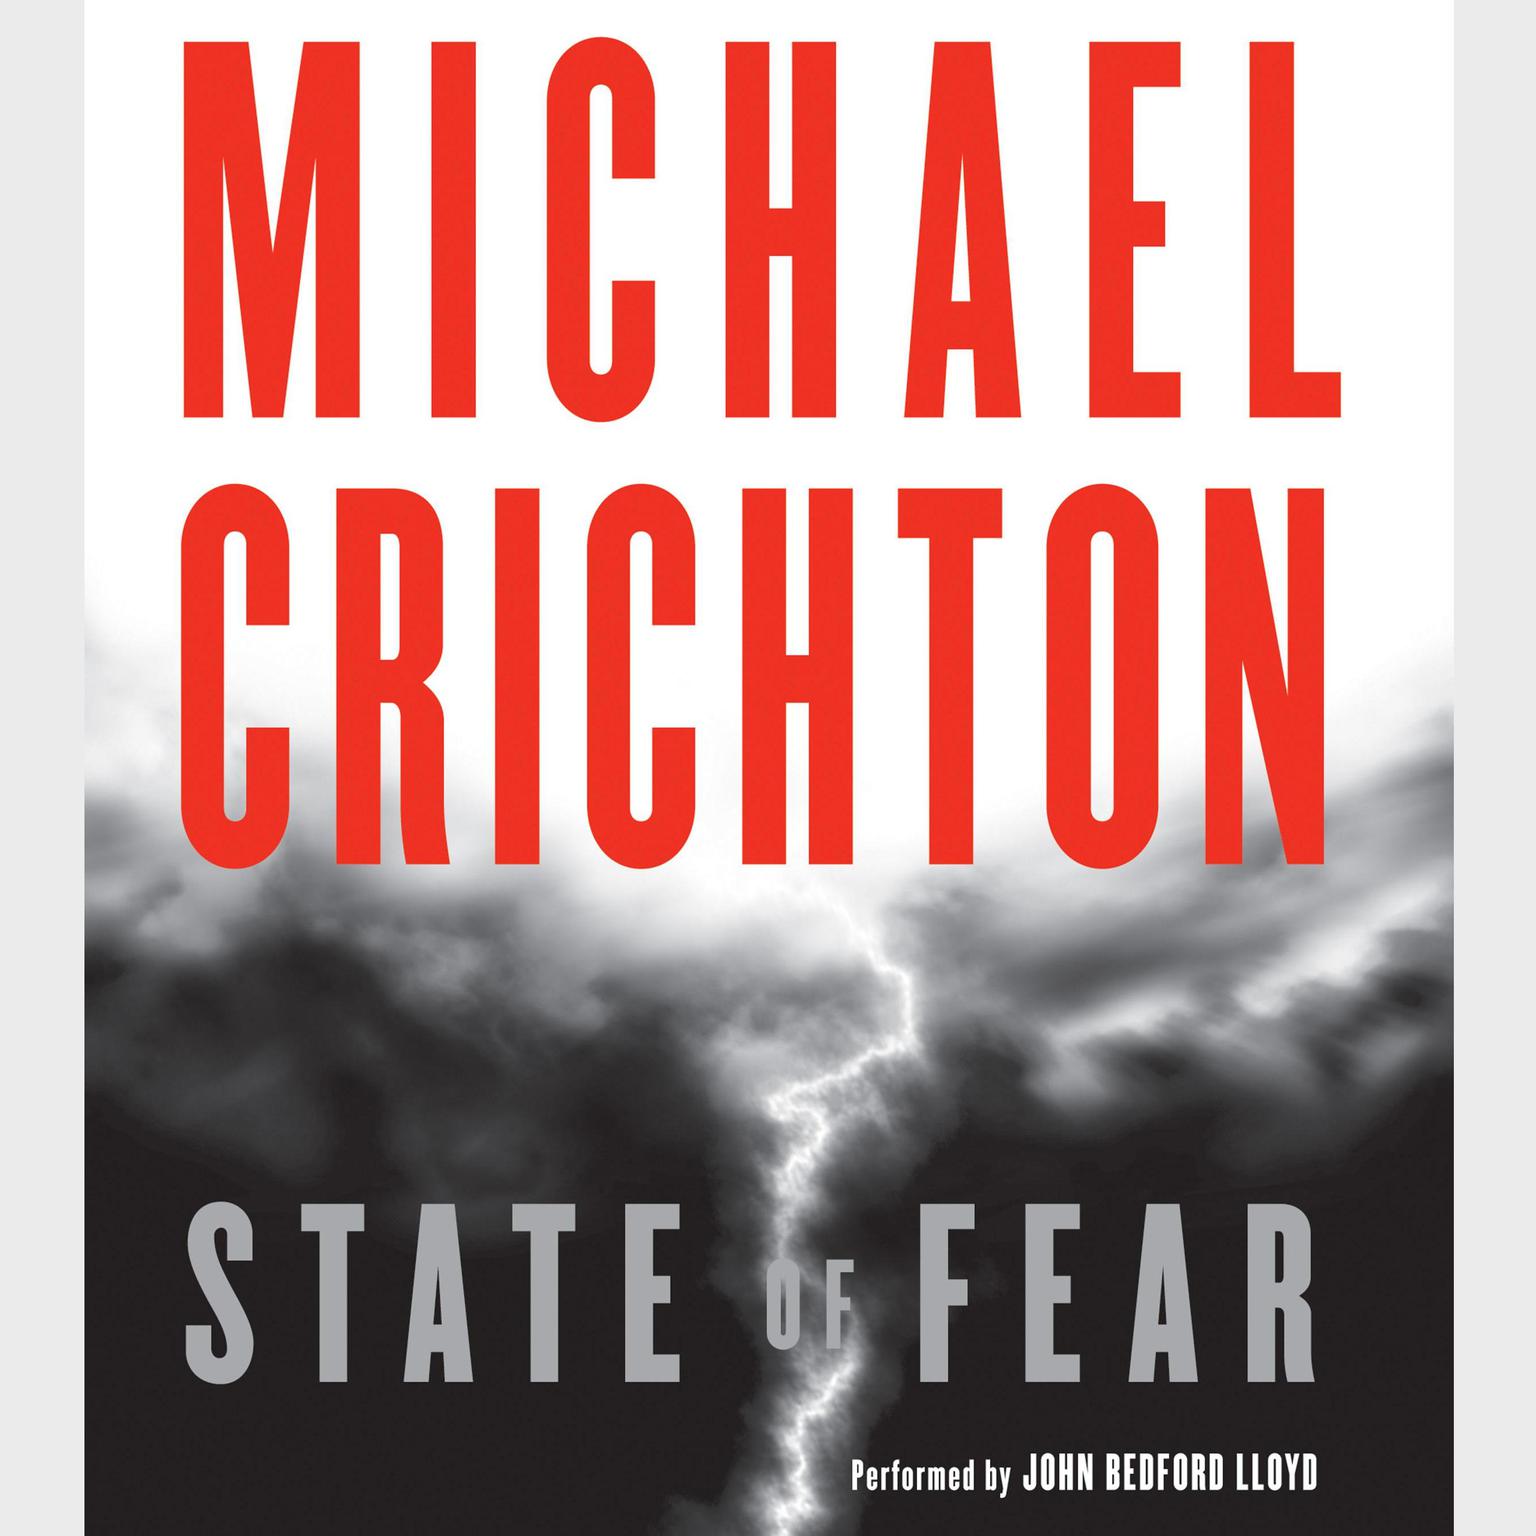 State of Fear (Abridged) Audiobook, by Michael Crichton